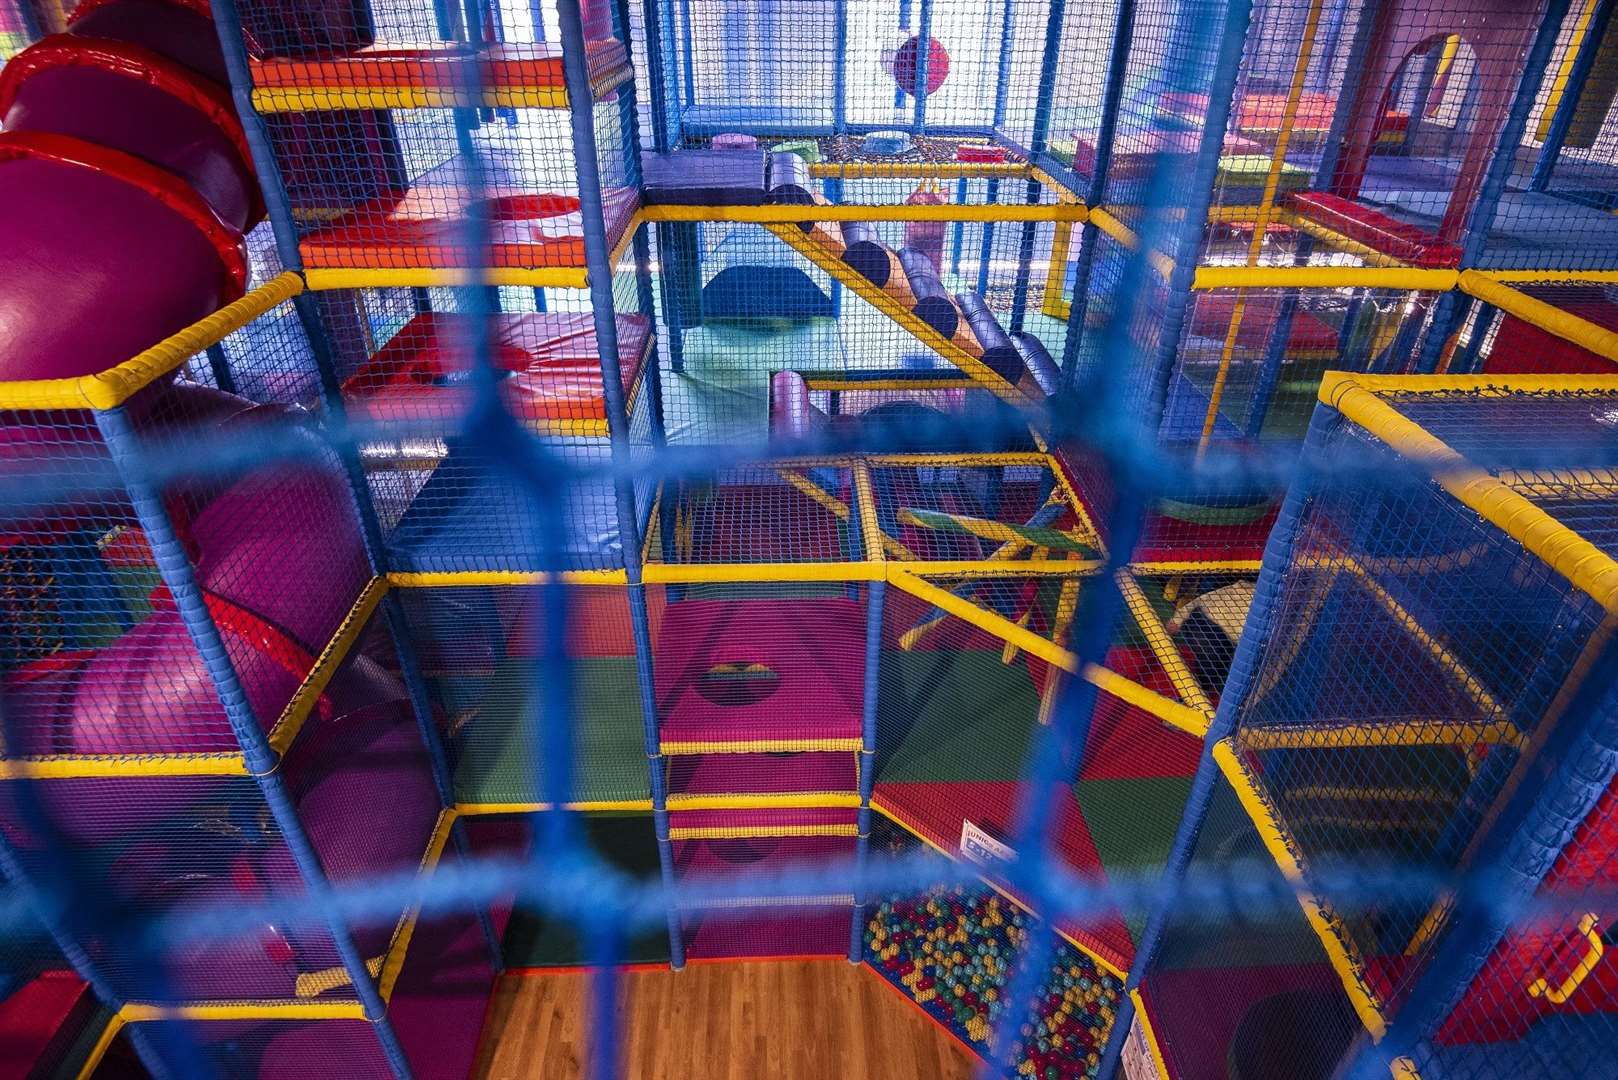 A multi-levelled soft play area was added to the centre as part of the upgrades